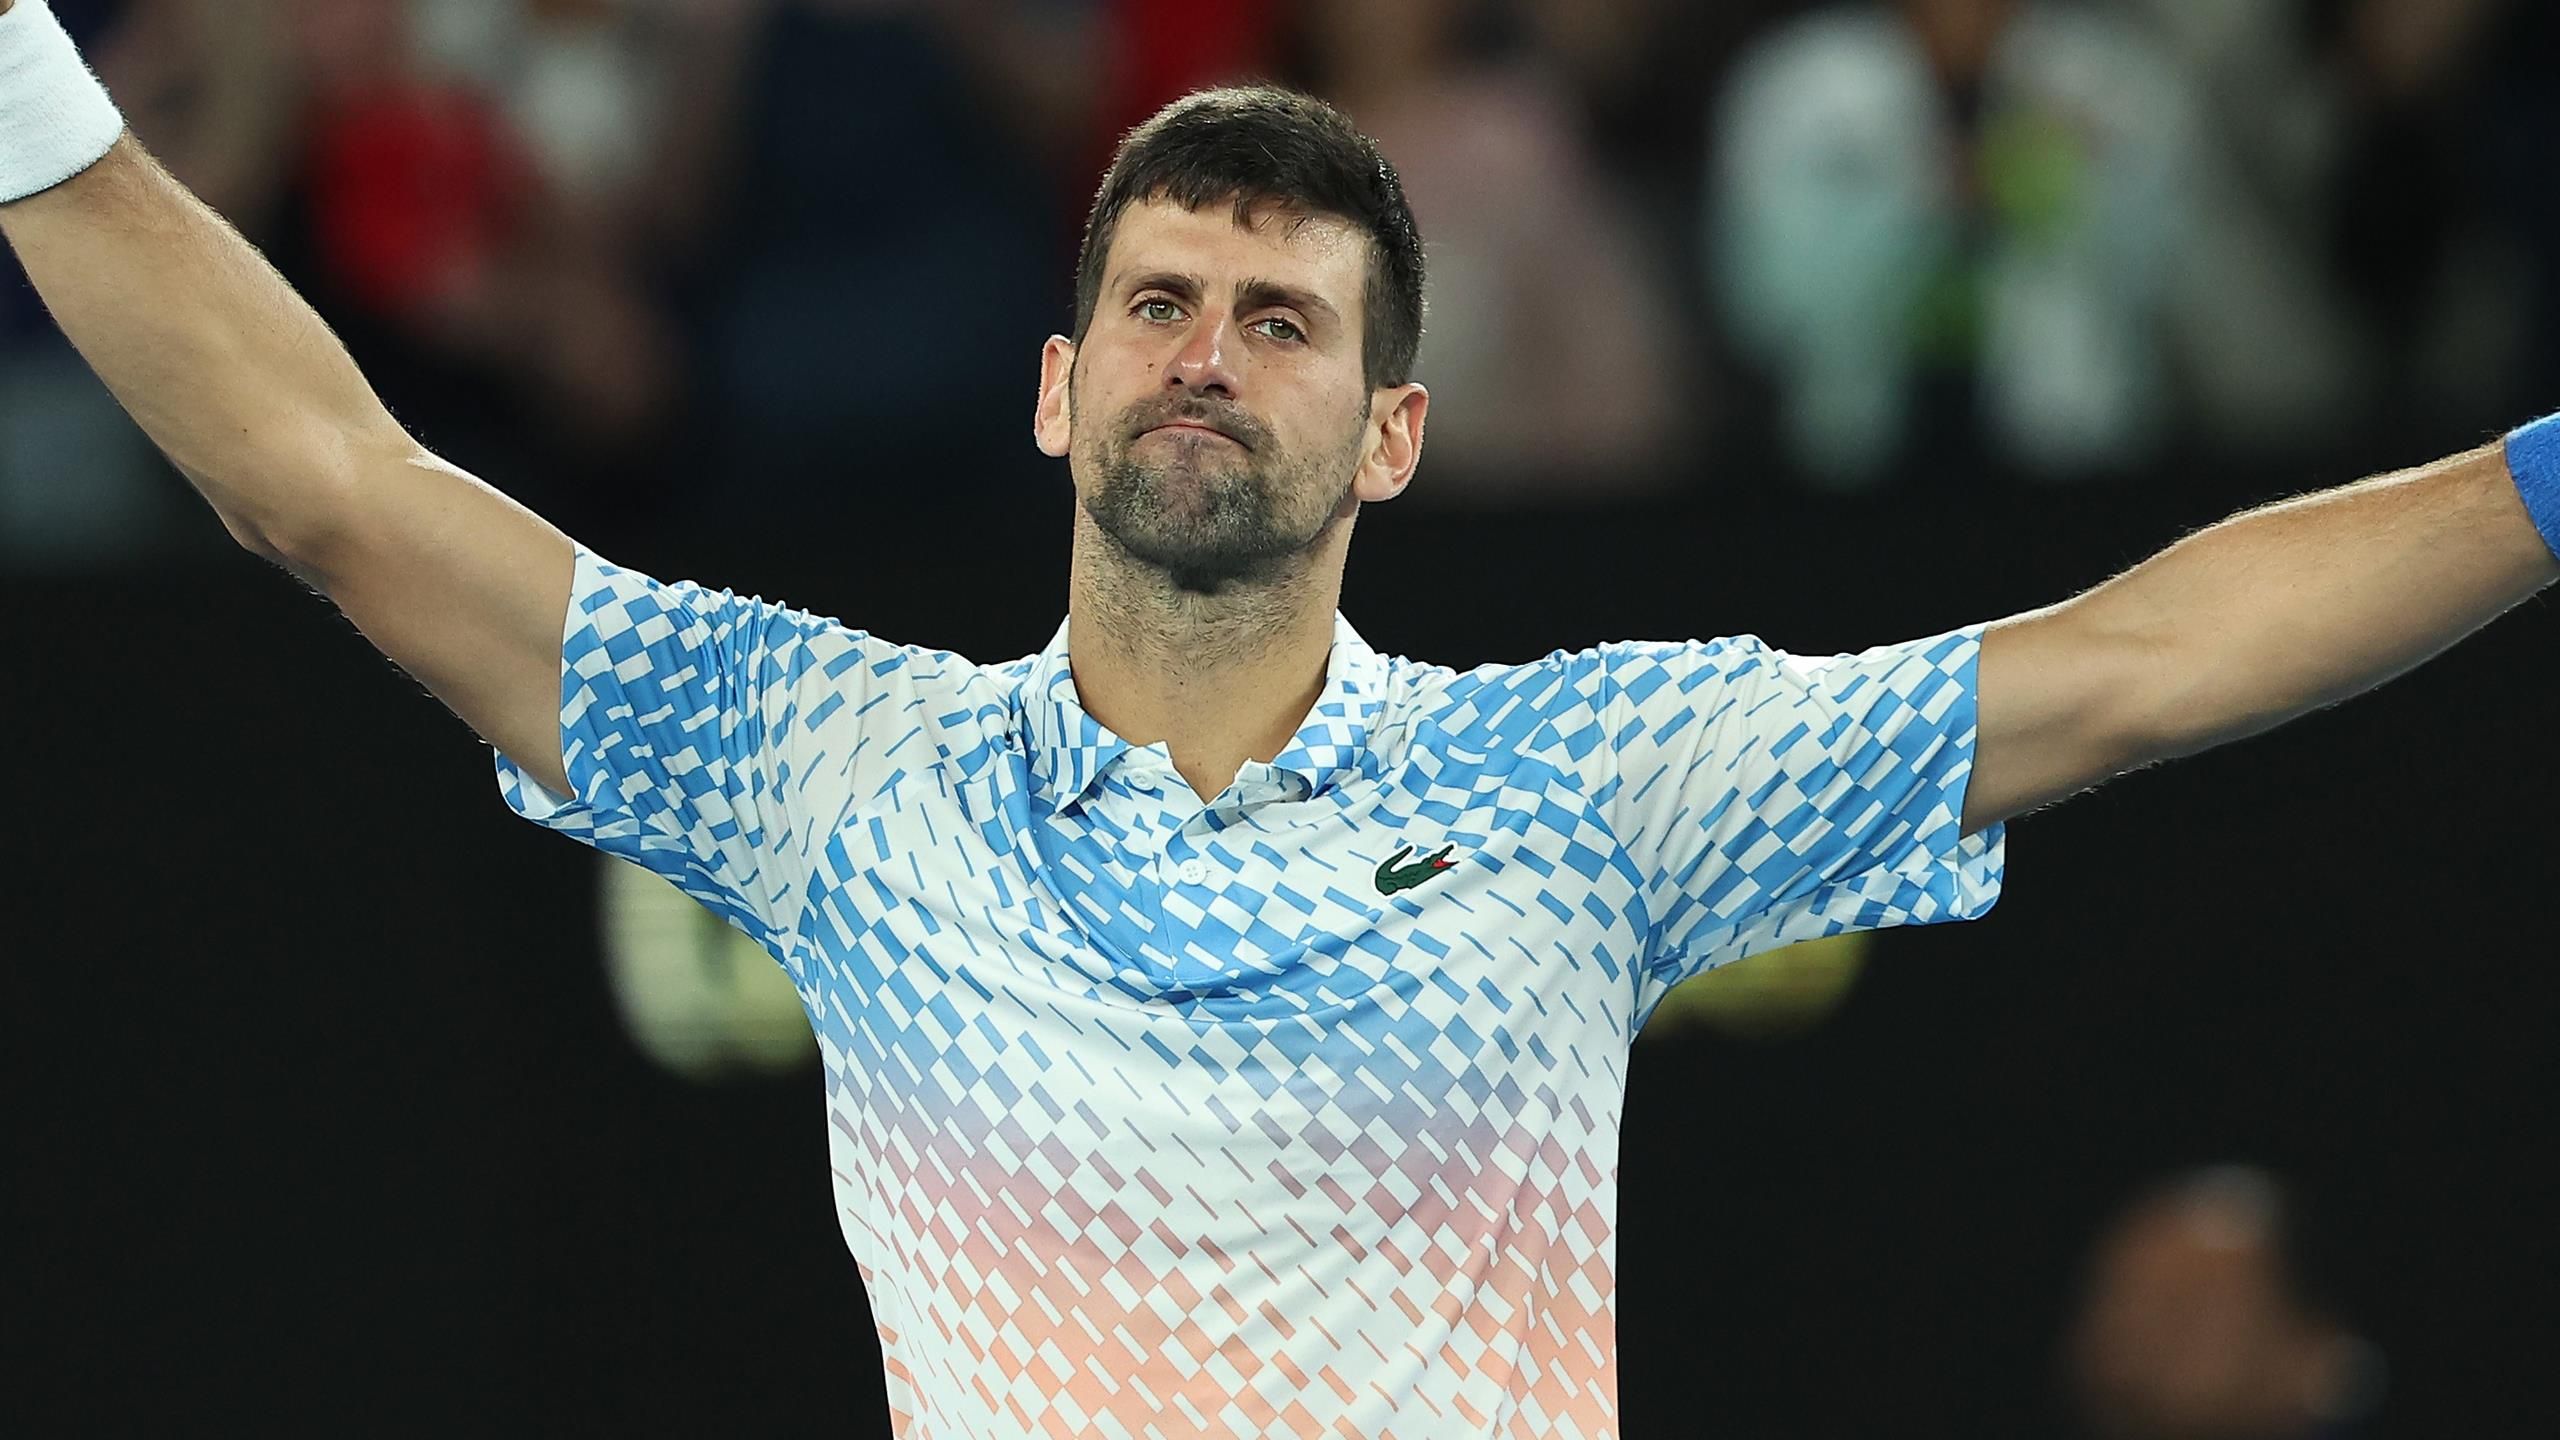 Novak Djokovic is relentless and back to his very best level, says Mats Wilander after Andrey Rublev win